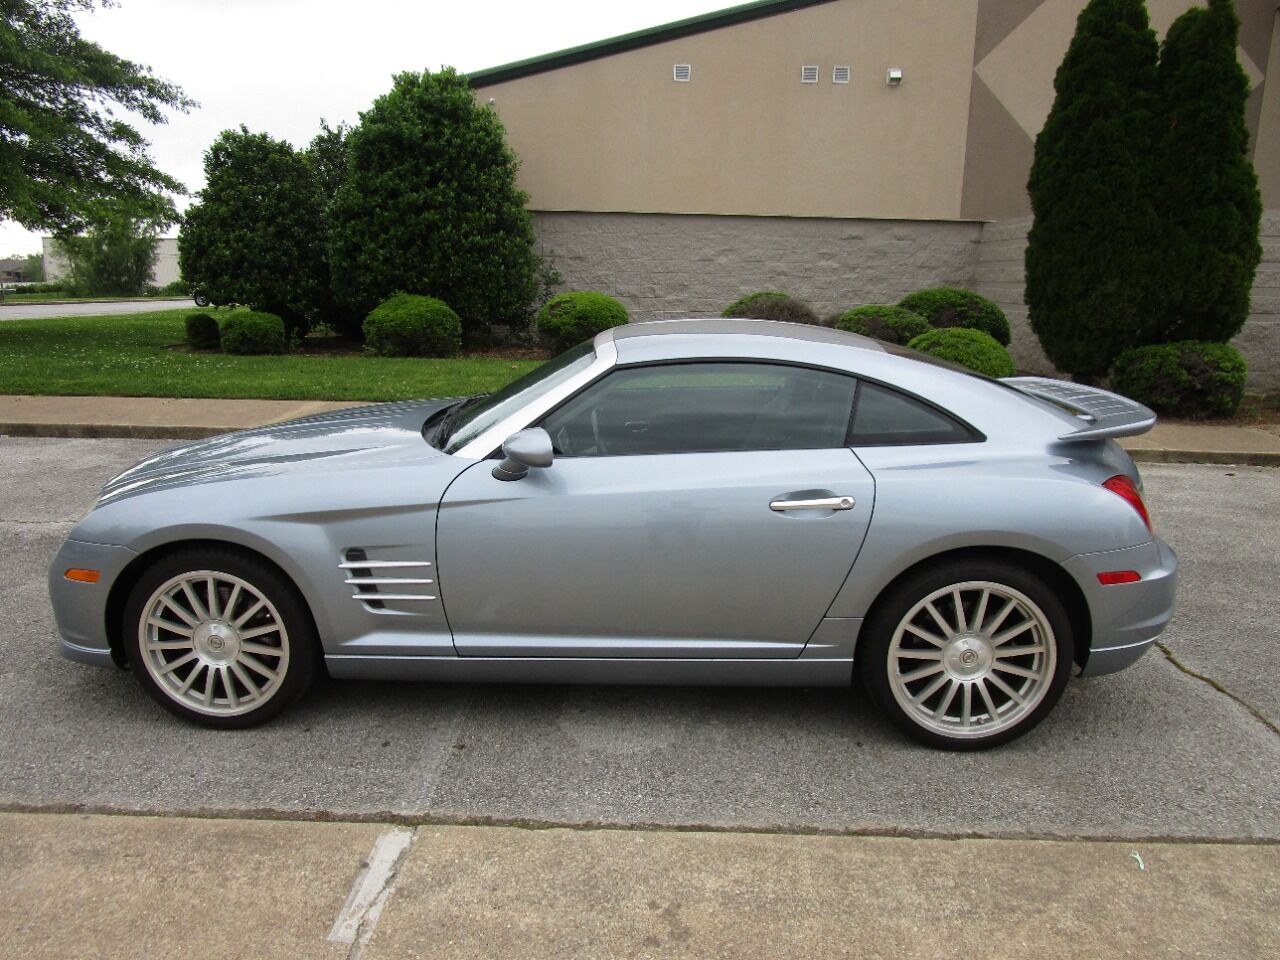 2005 Chrysler Crossfire SRT-6 Supercharged Coupe RWD